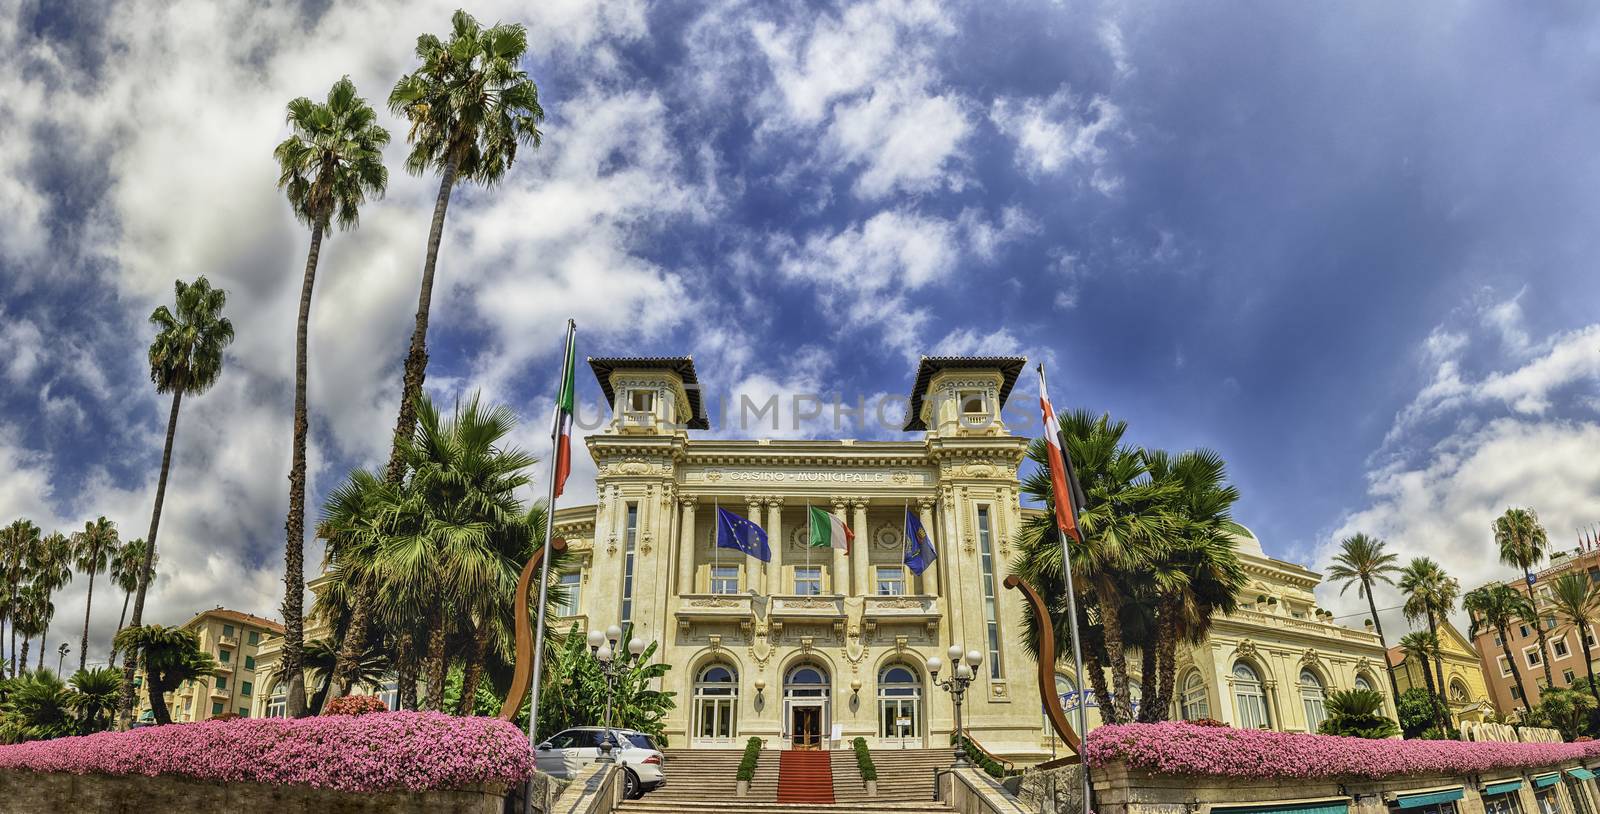 Facade of the scenic Sanremo Casino with palms and flowers by marcorubino